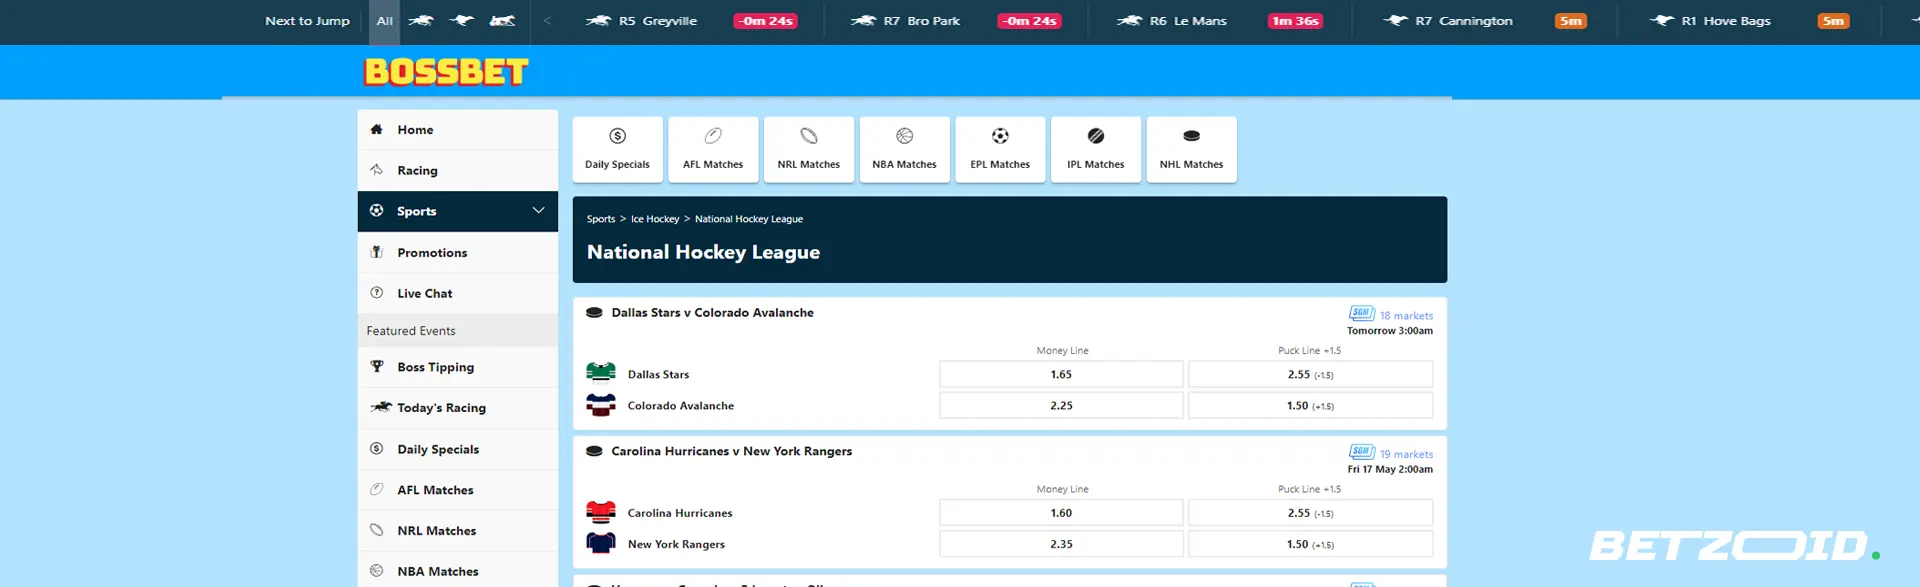 Bossbet sport betting page featuring NHL matches and betting options.